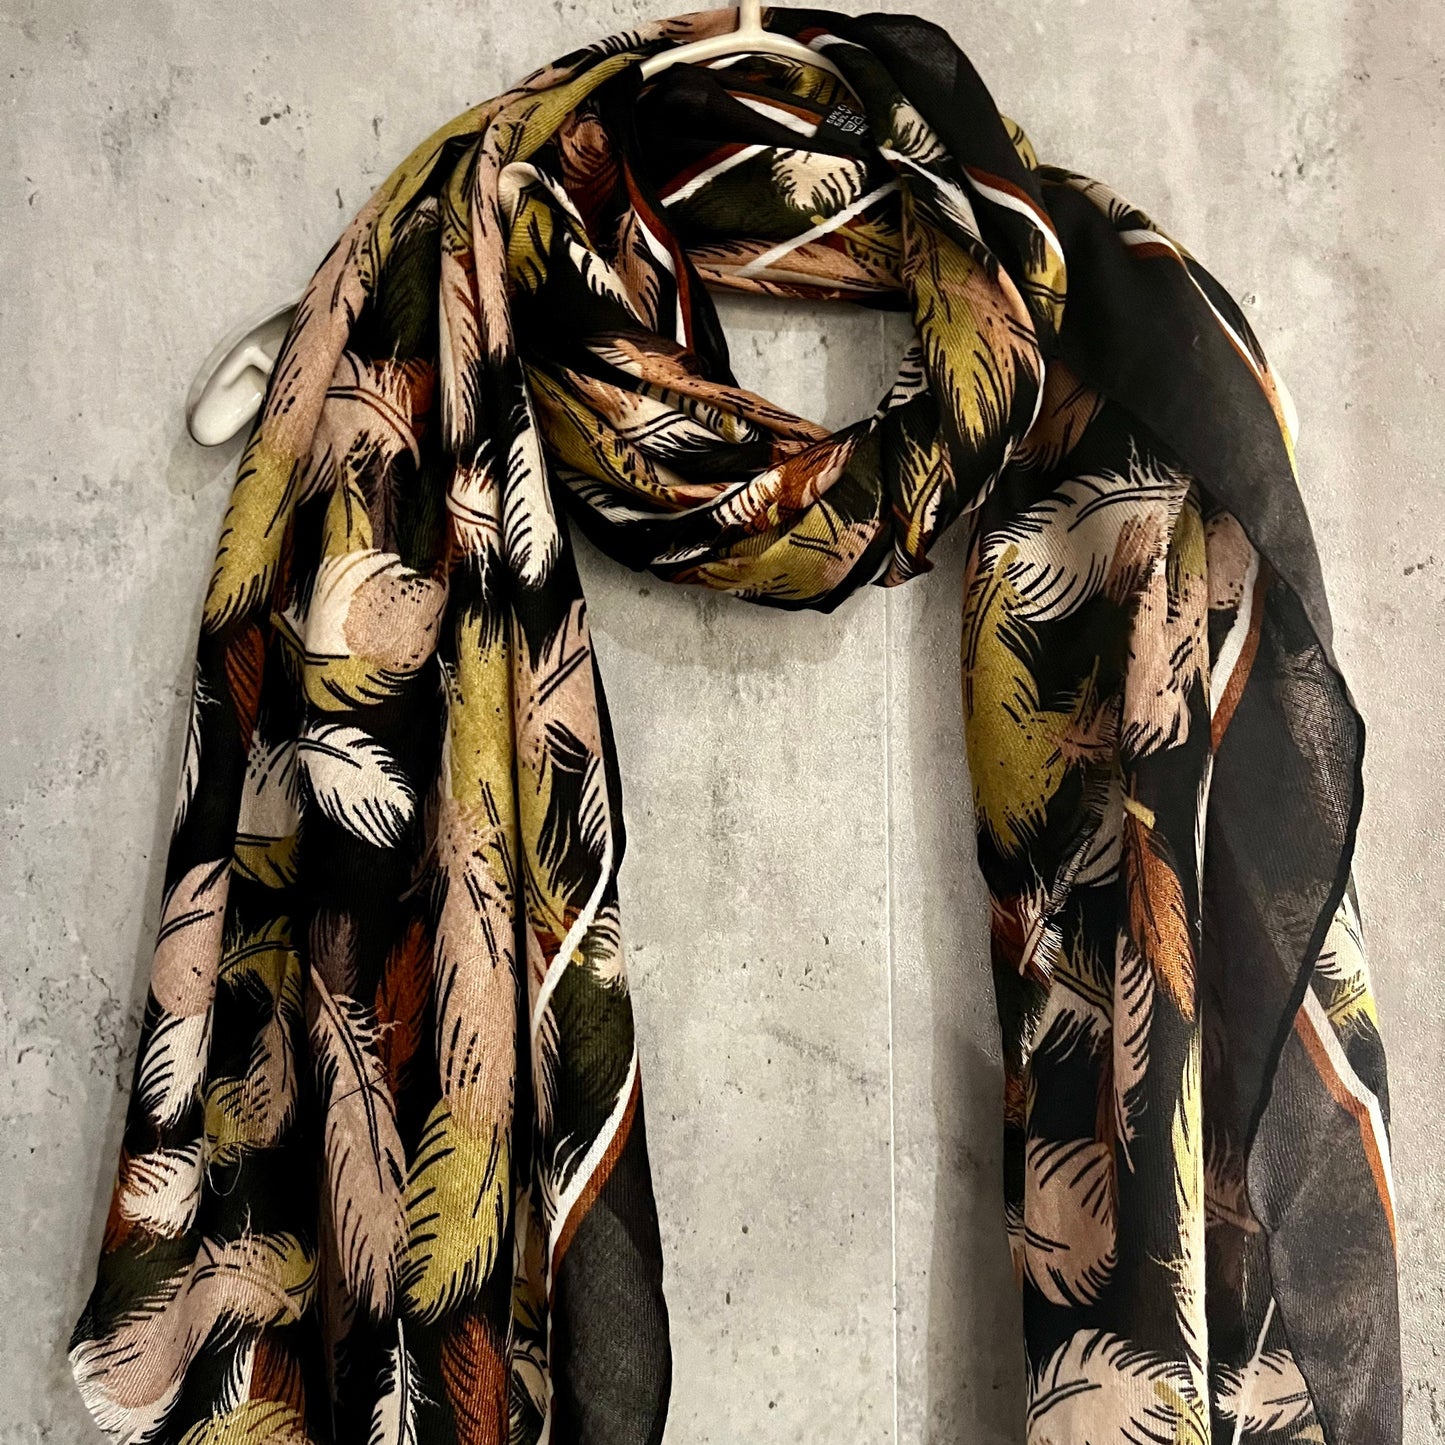 Floating Green Beige Feathers Black Cotton Scarf/Summer Autumn Winter Women Scarf/Gifts For Her Birthday Christmas/UK Seller/Printed Scarf